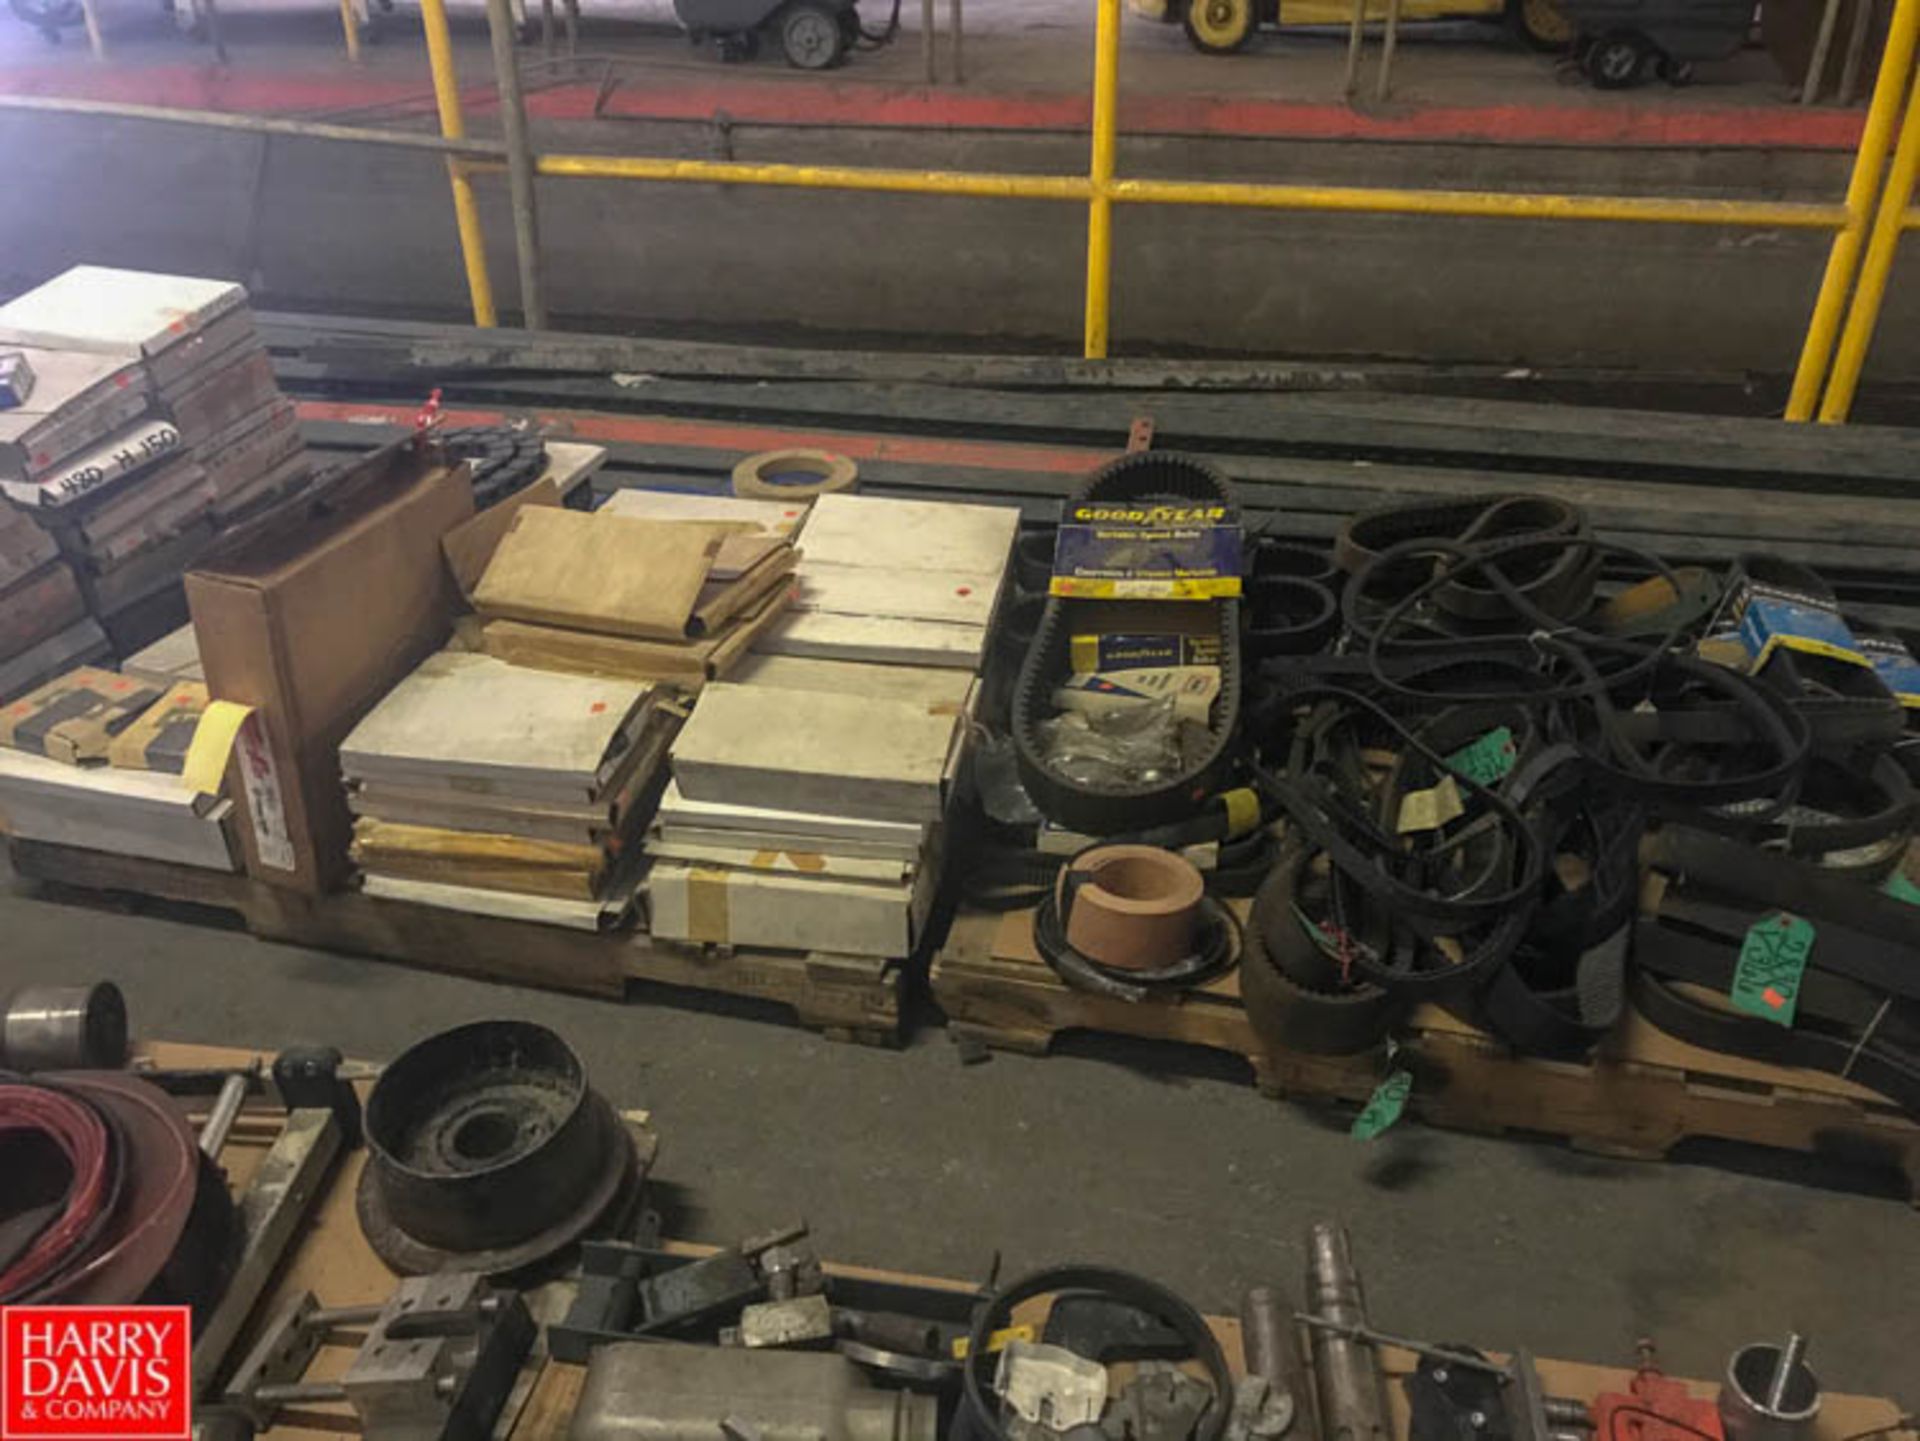 Assorted Drive Belts and Hardware Rigging Fee: $ 25